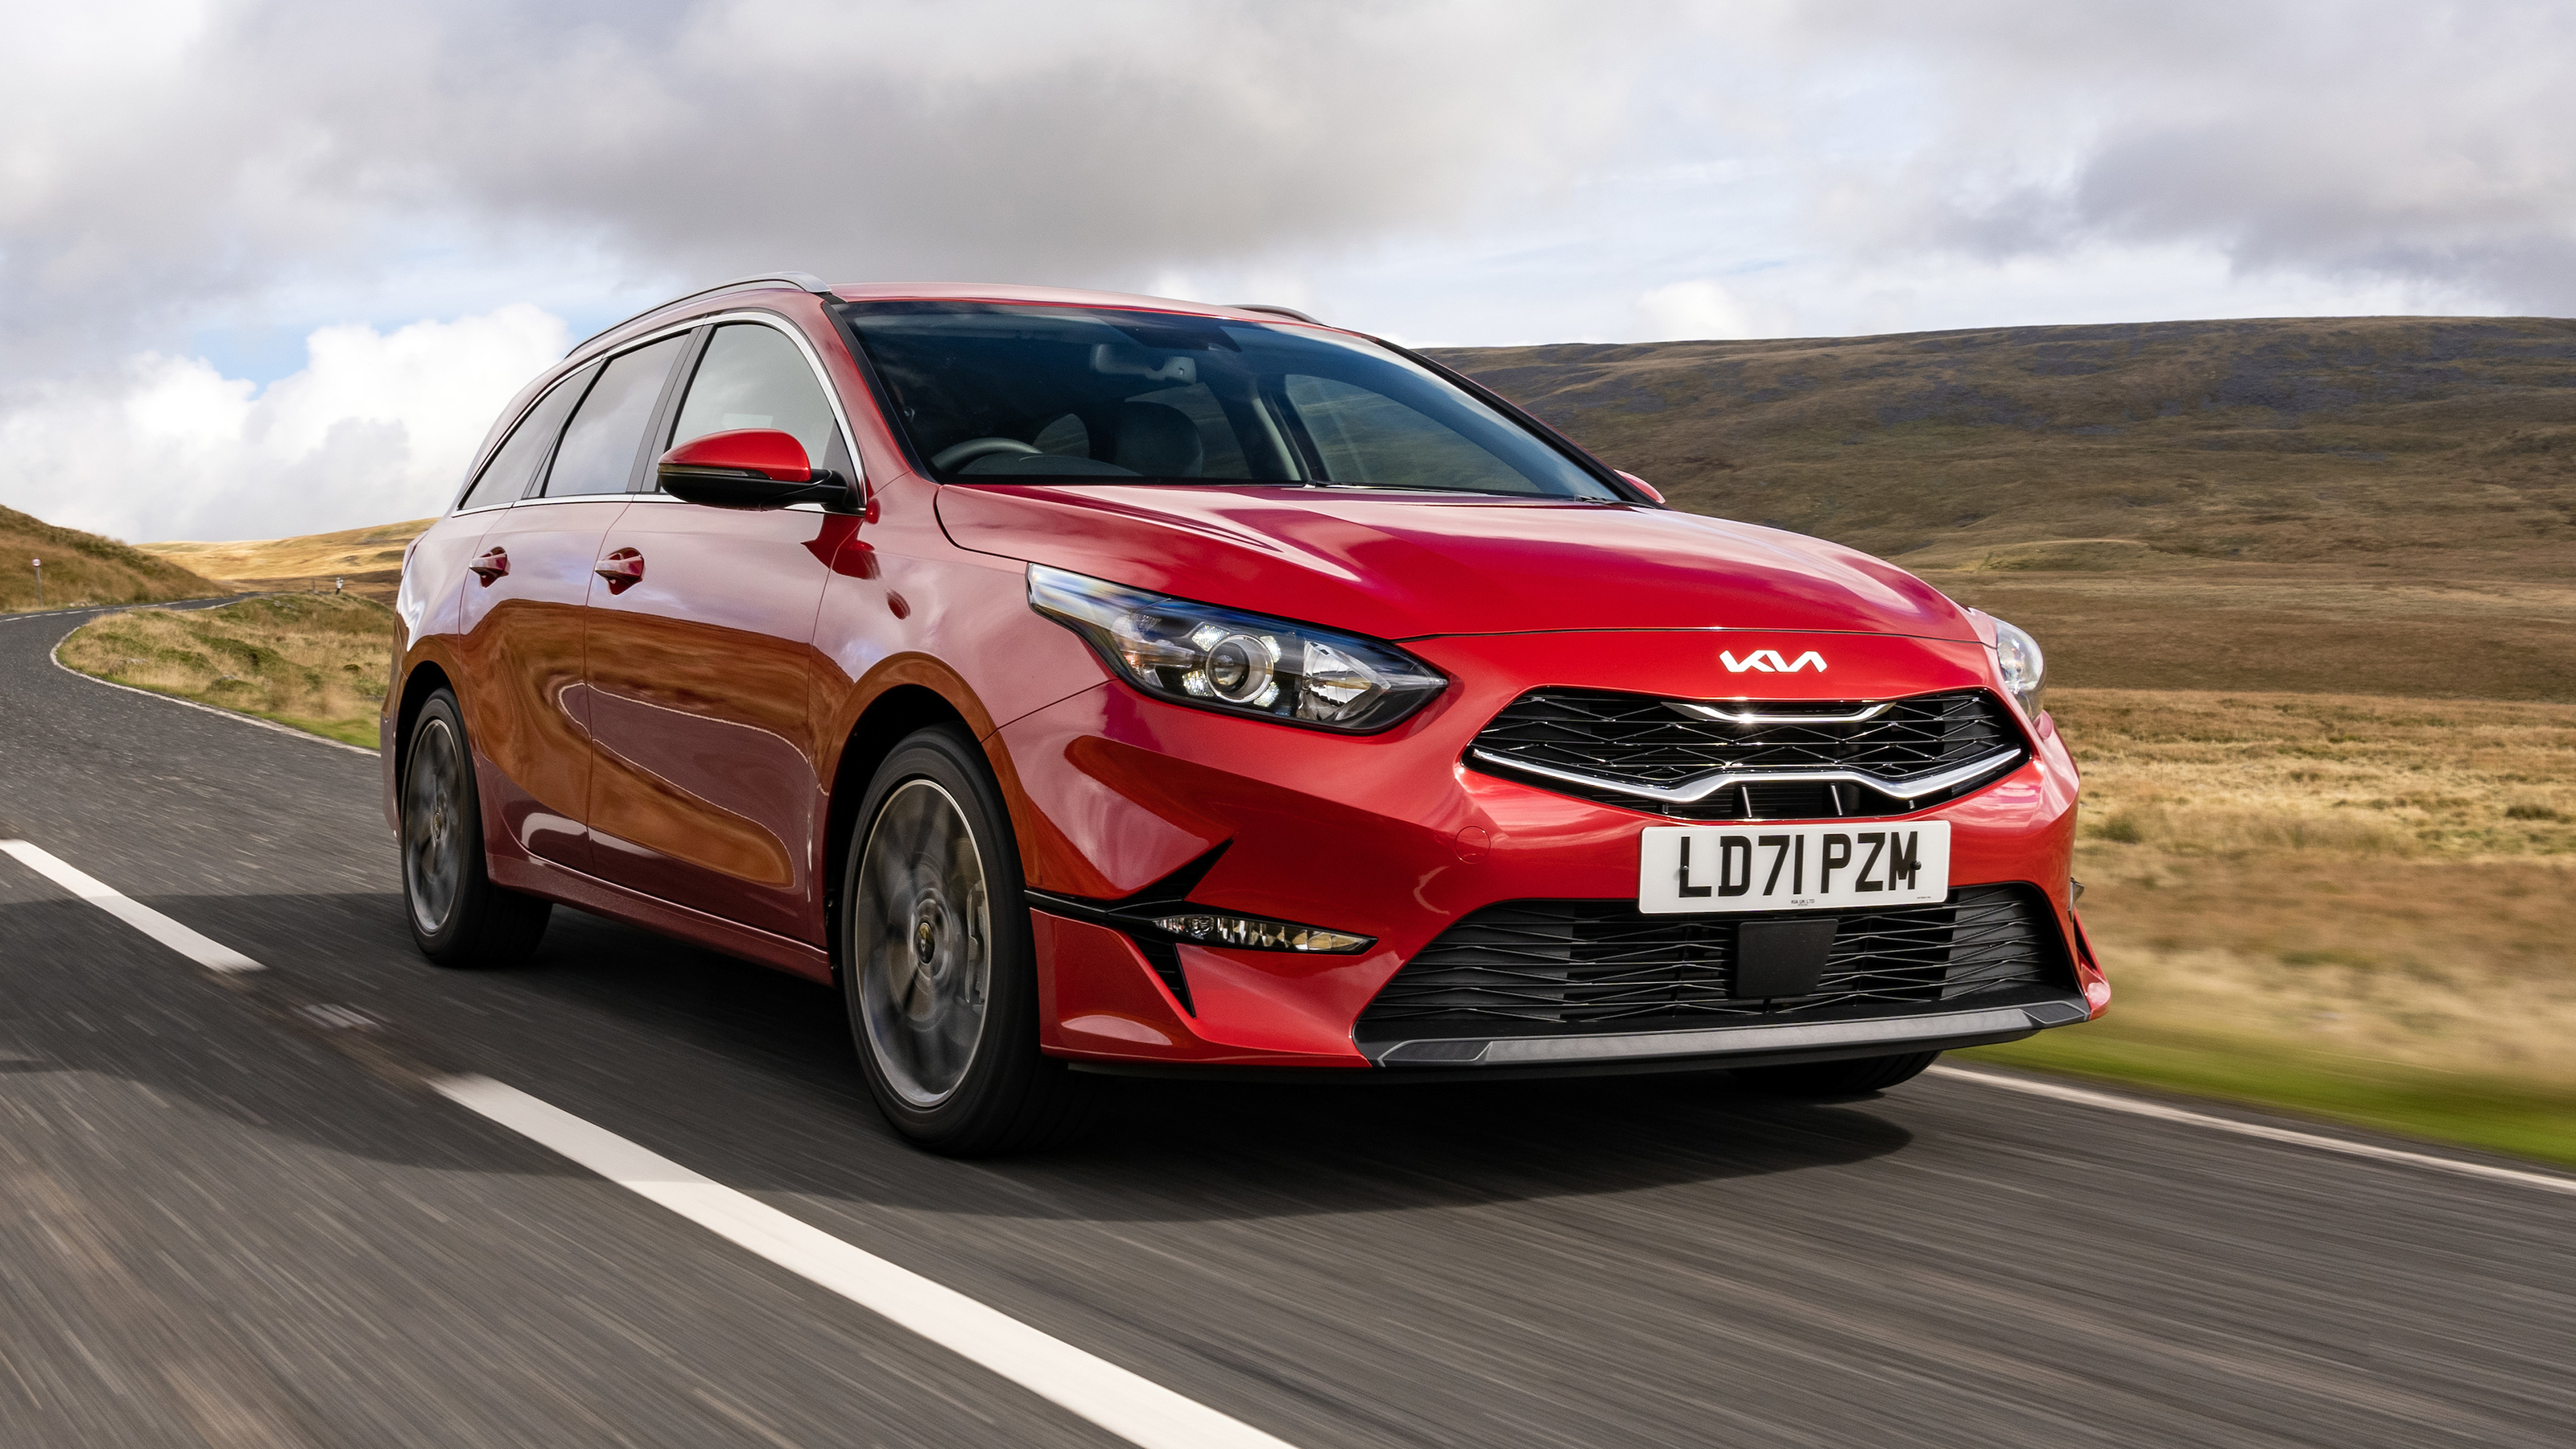 https://mediacloud.carbuyer.co.uk/image/private/s--qxssmX14--/v1636554963/carbuyer/2021/11/Kia%20Ceed%20Sportswagon%20estate%20review-12.jpg